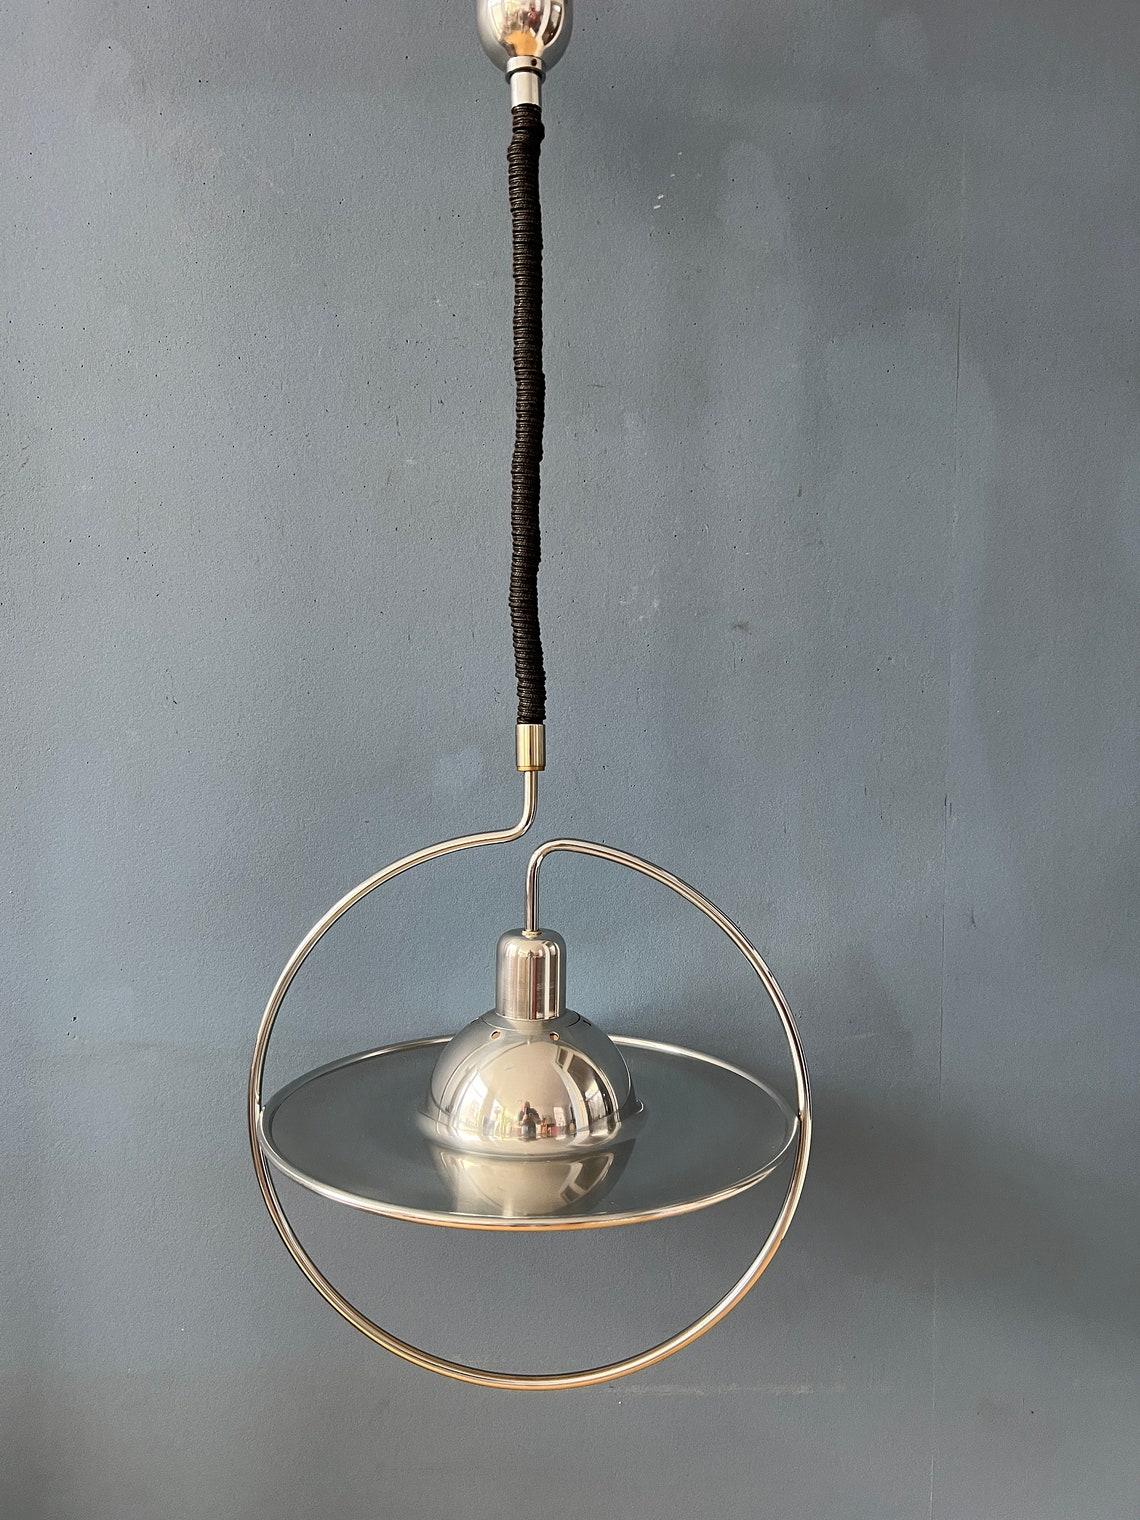 Mid Century UFO Pendant Lamp with Decorative Chrome Frame, 1970s For Sale 1